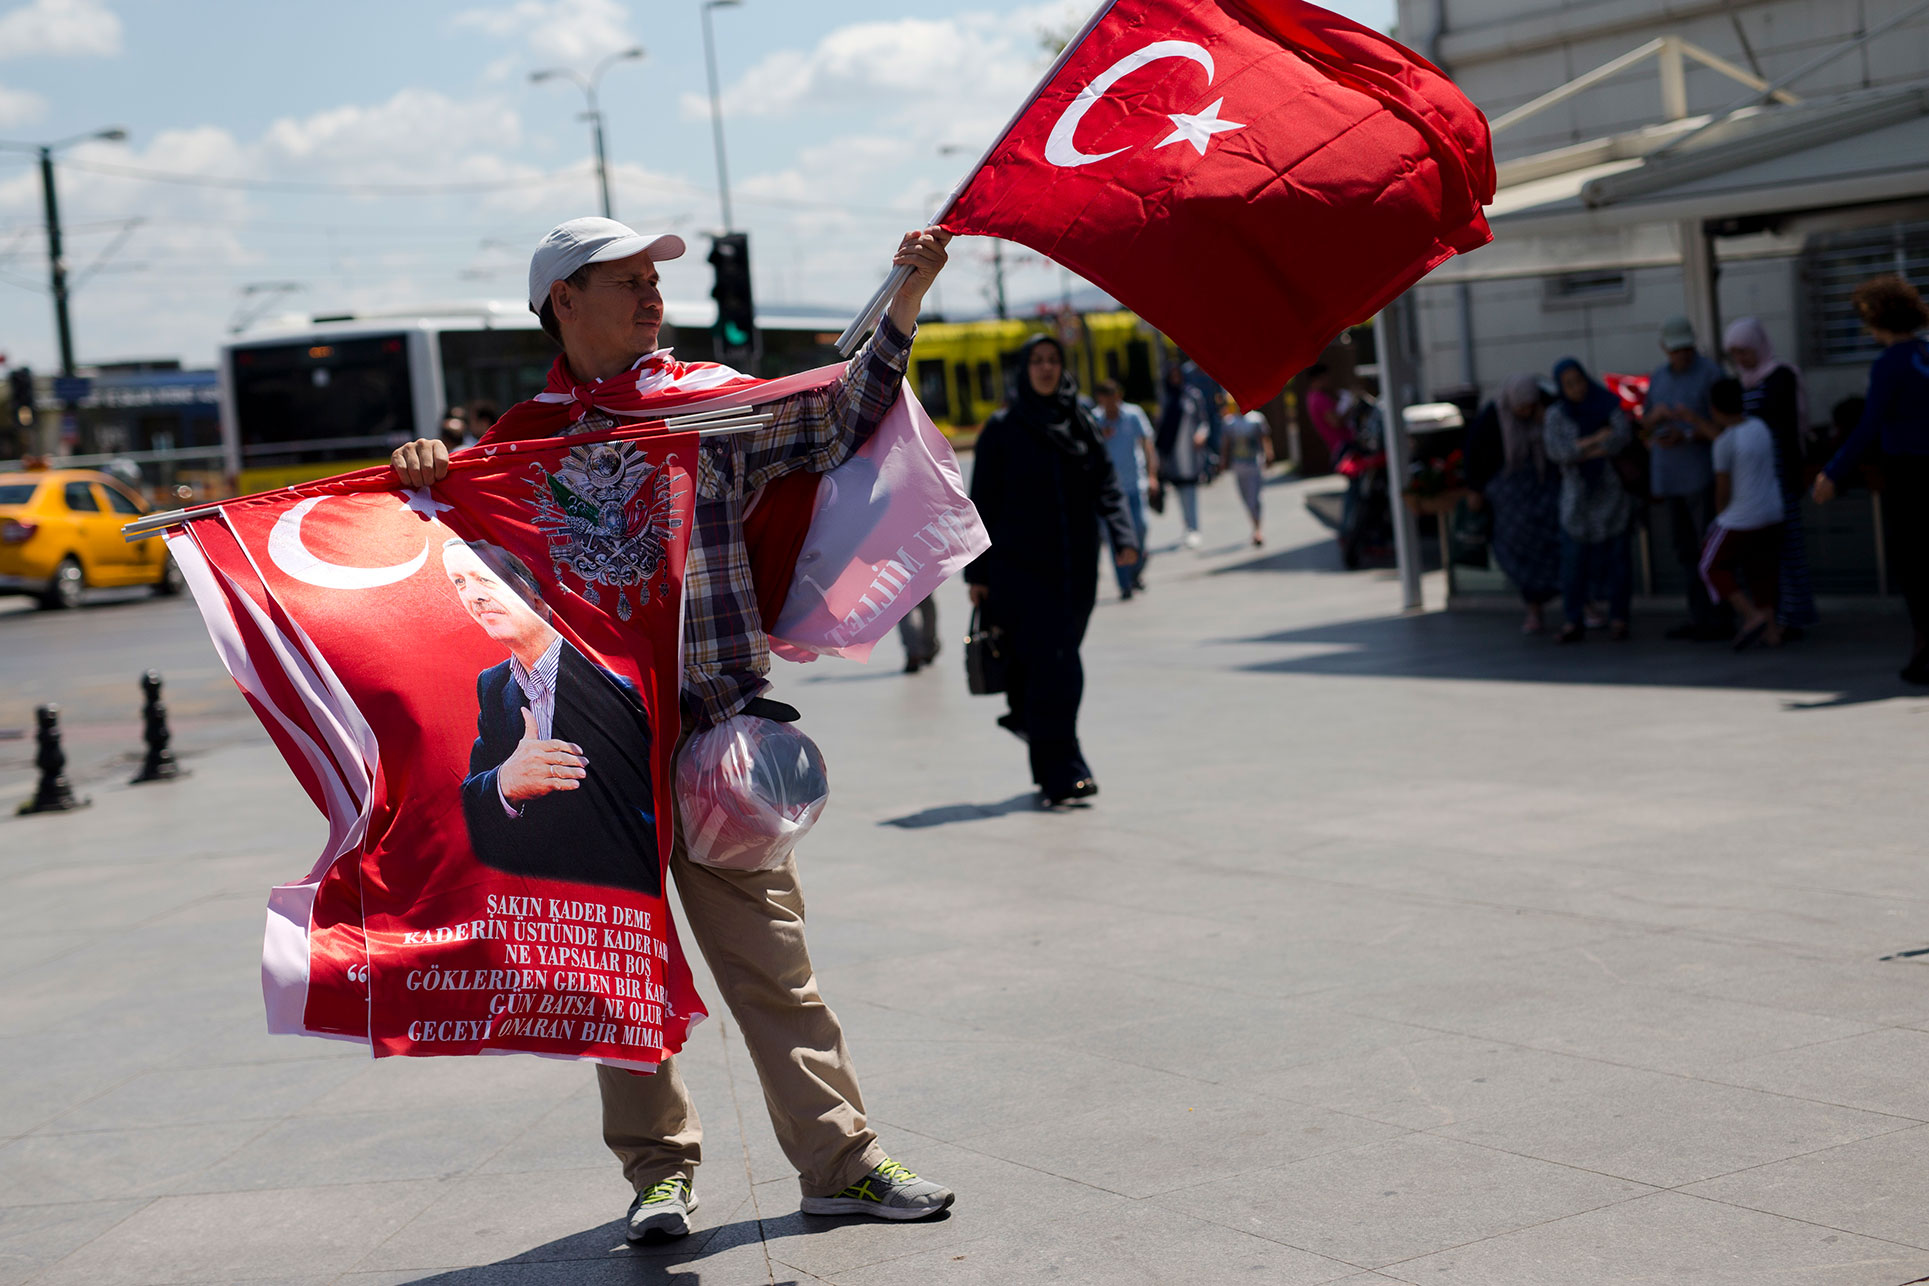 A street vendor sells flags, some showing Turkish President Recep Tayyip Erdogan in central Istanbul, Thursday, July 21, 2016. (AP Photo/Petros Giannakouris)